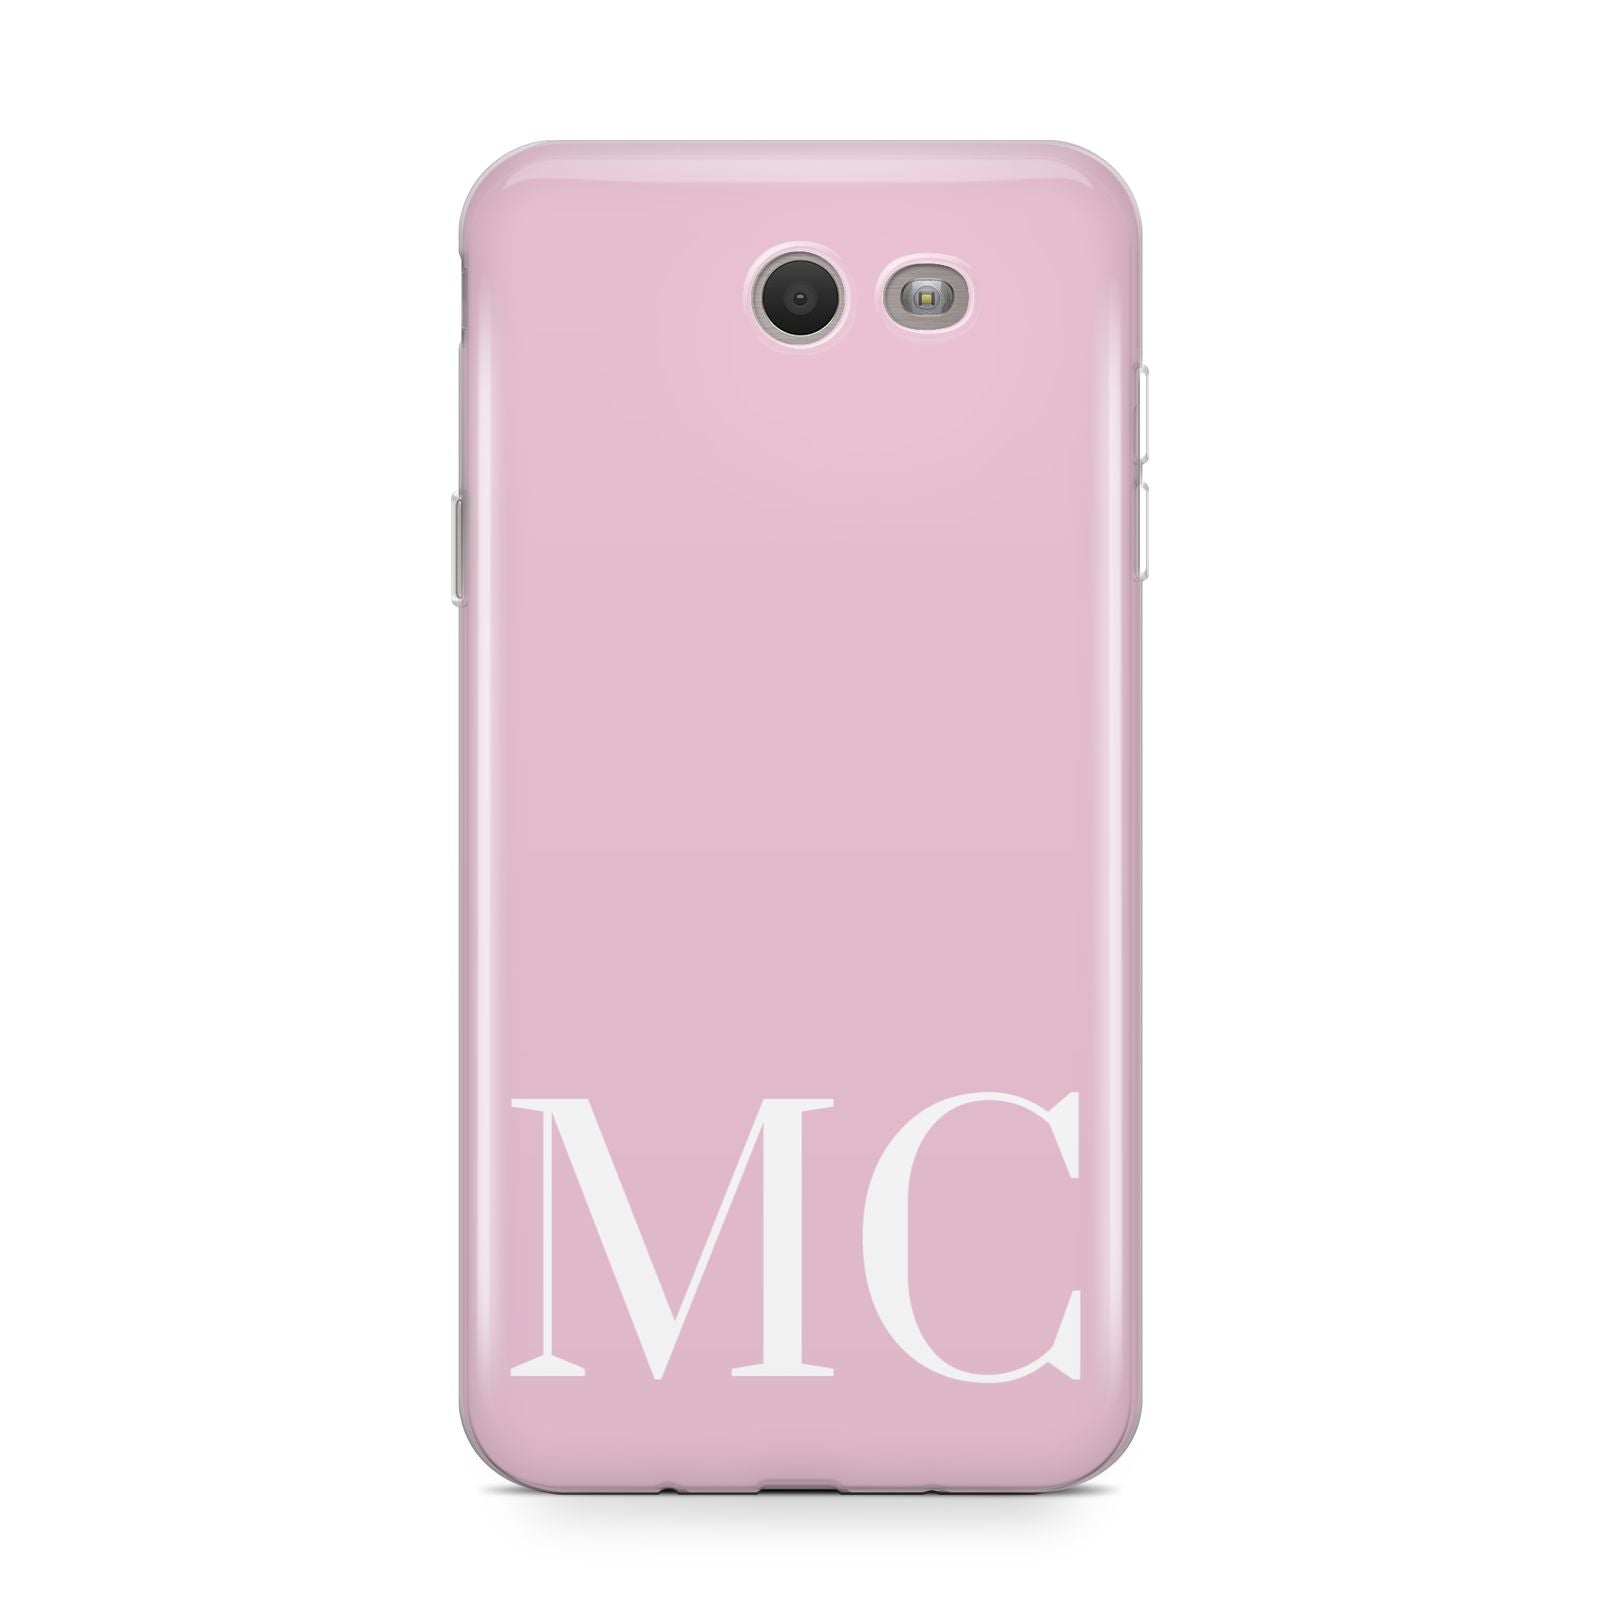 Initials Personalised 2 Samsung Galaxy J7 2017 Case